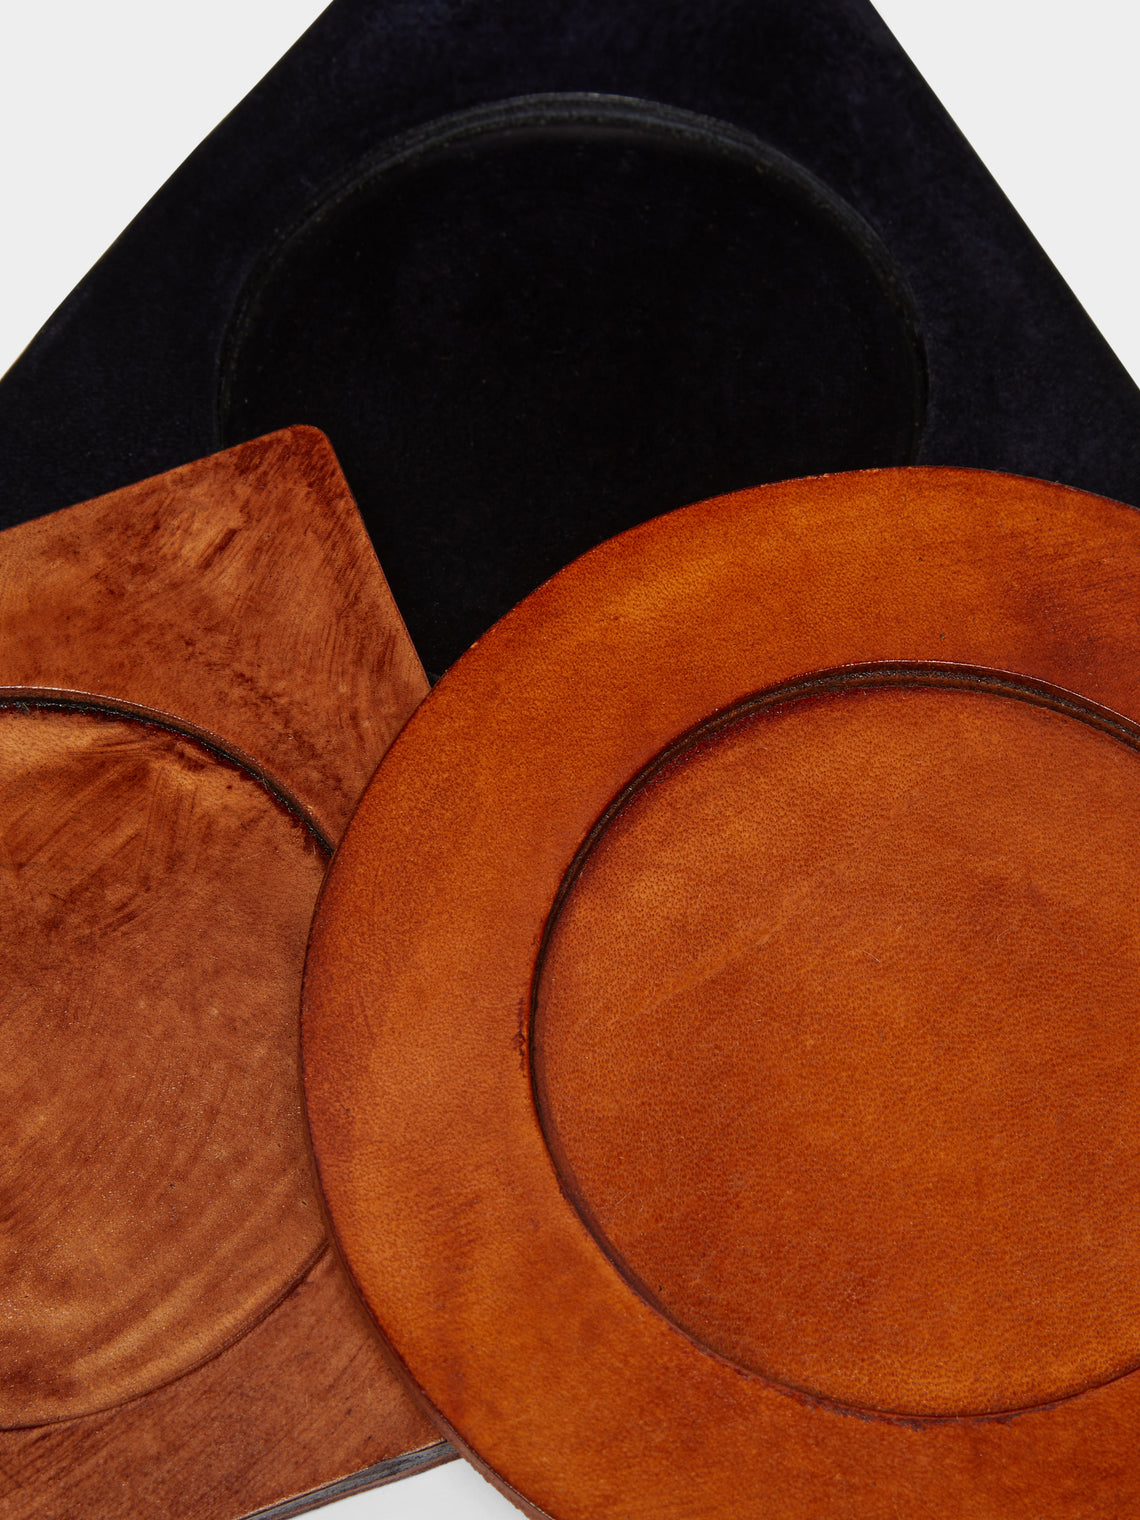 Peter Speliopoulos Projects - Hand-Stained Leather Coasters (Set of 6) -  - ABASK